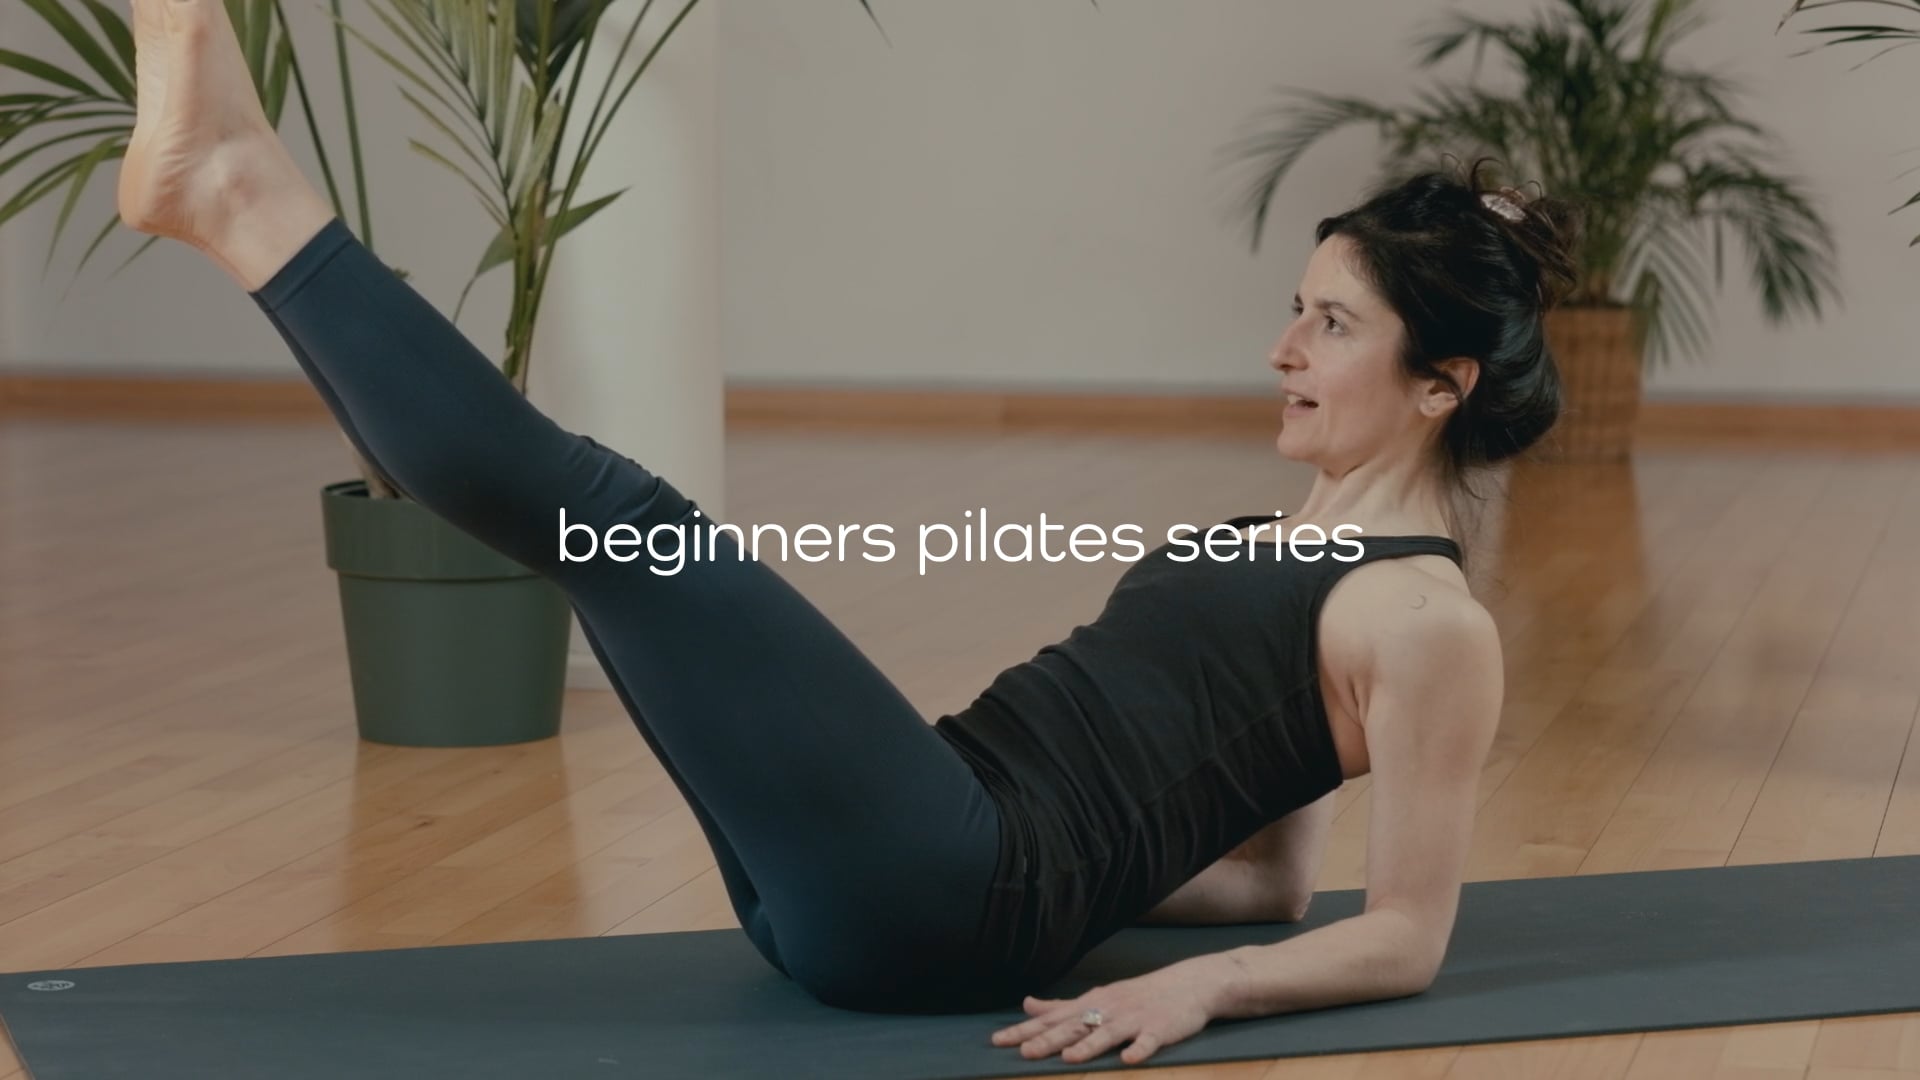 An Intro to Our Pilates Beginners Course